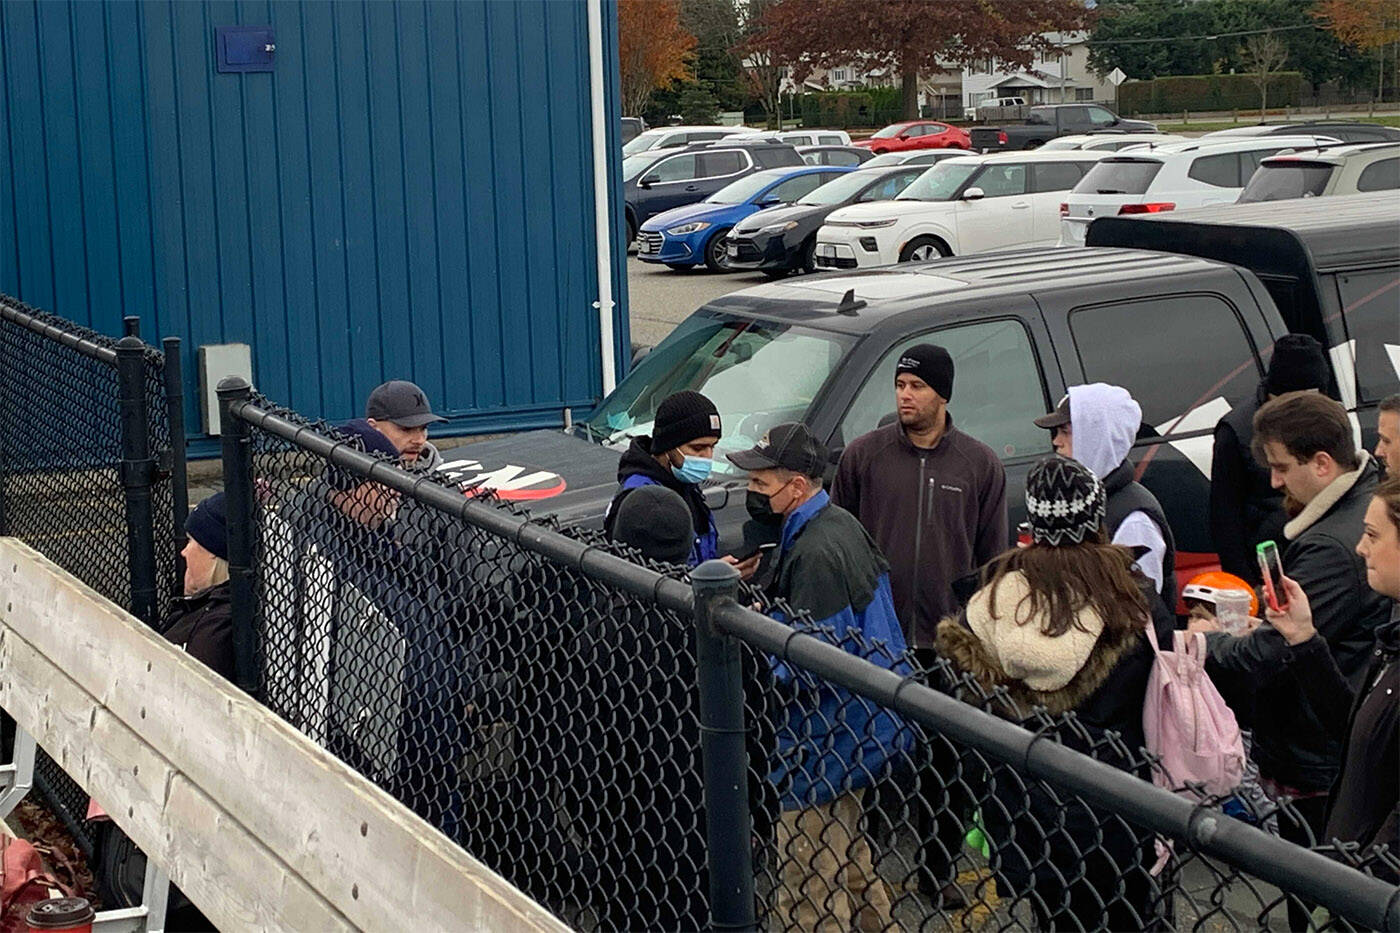 A small group of anti-vaxxers got past security and into a Chilliwack Giants football game at Townsend Park on Saturday, Nov. 6, 2021. (Submitted)